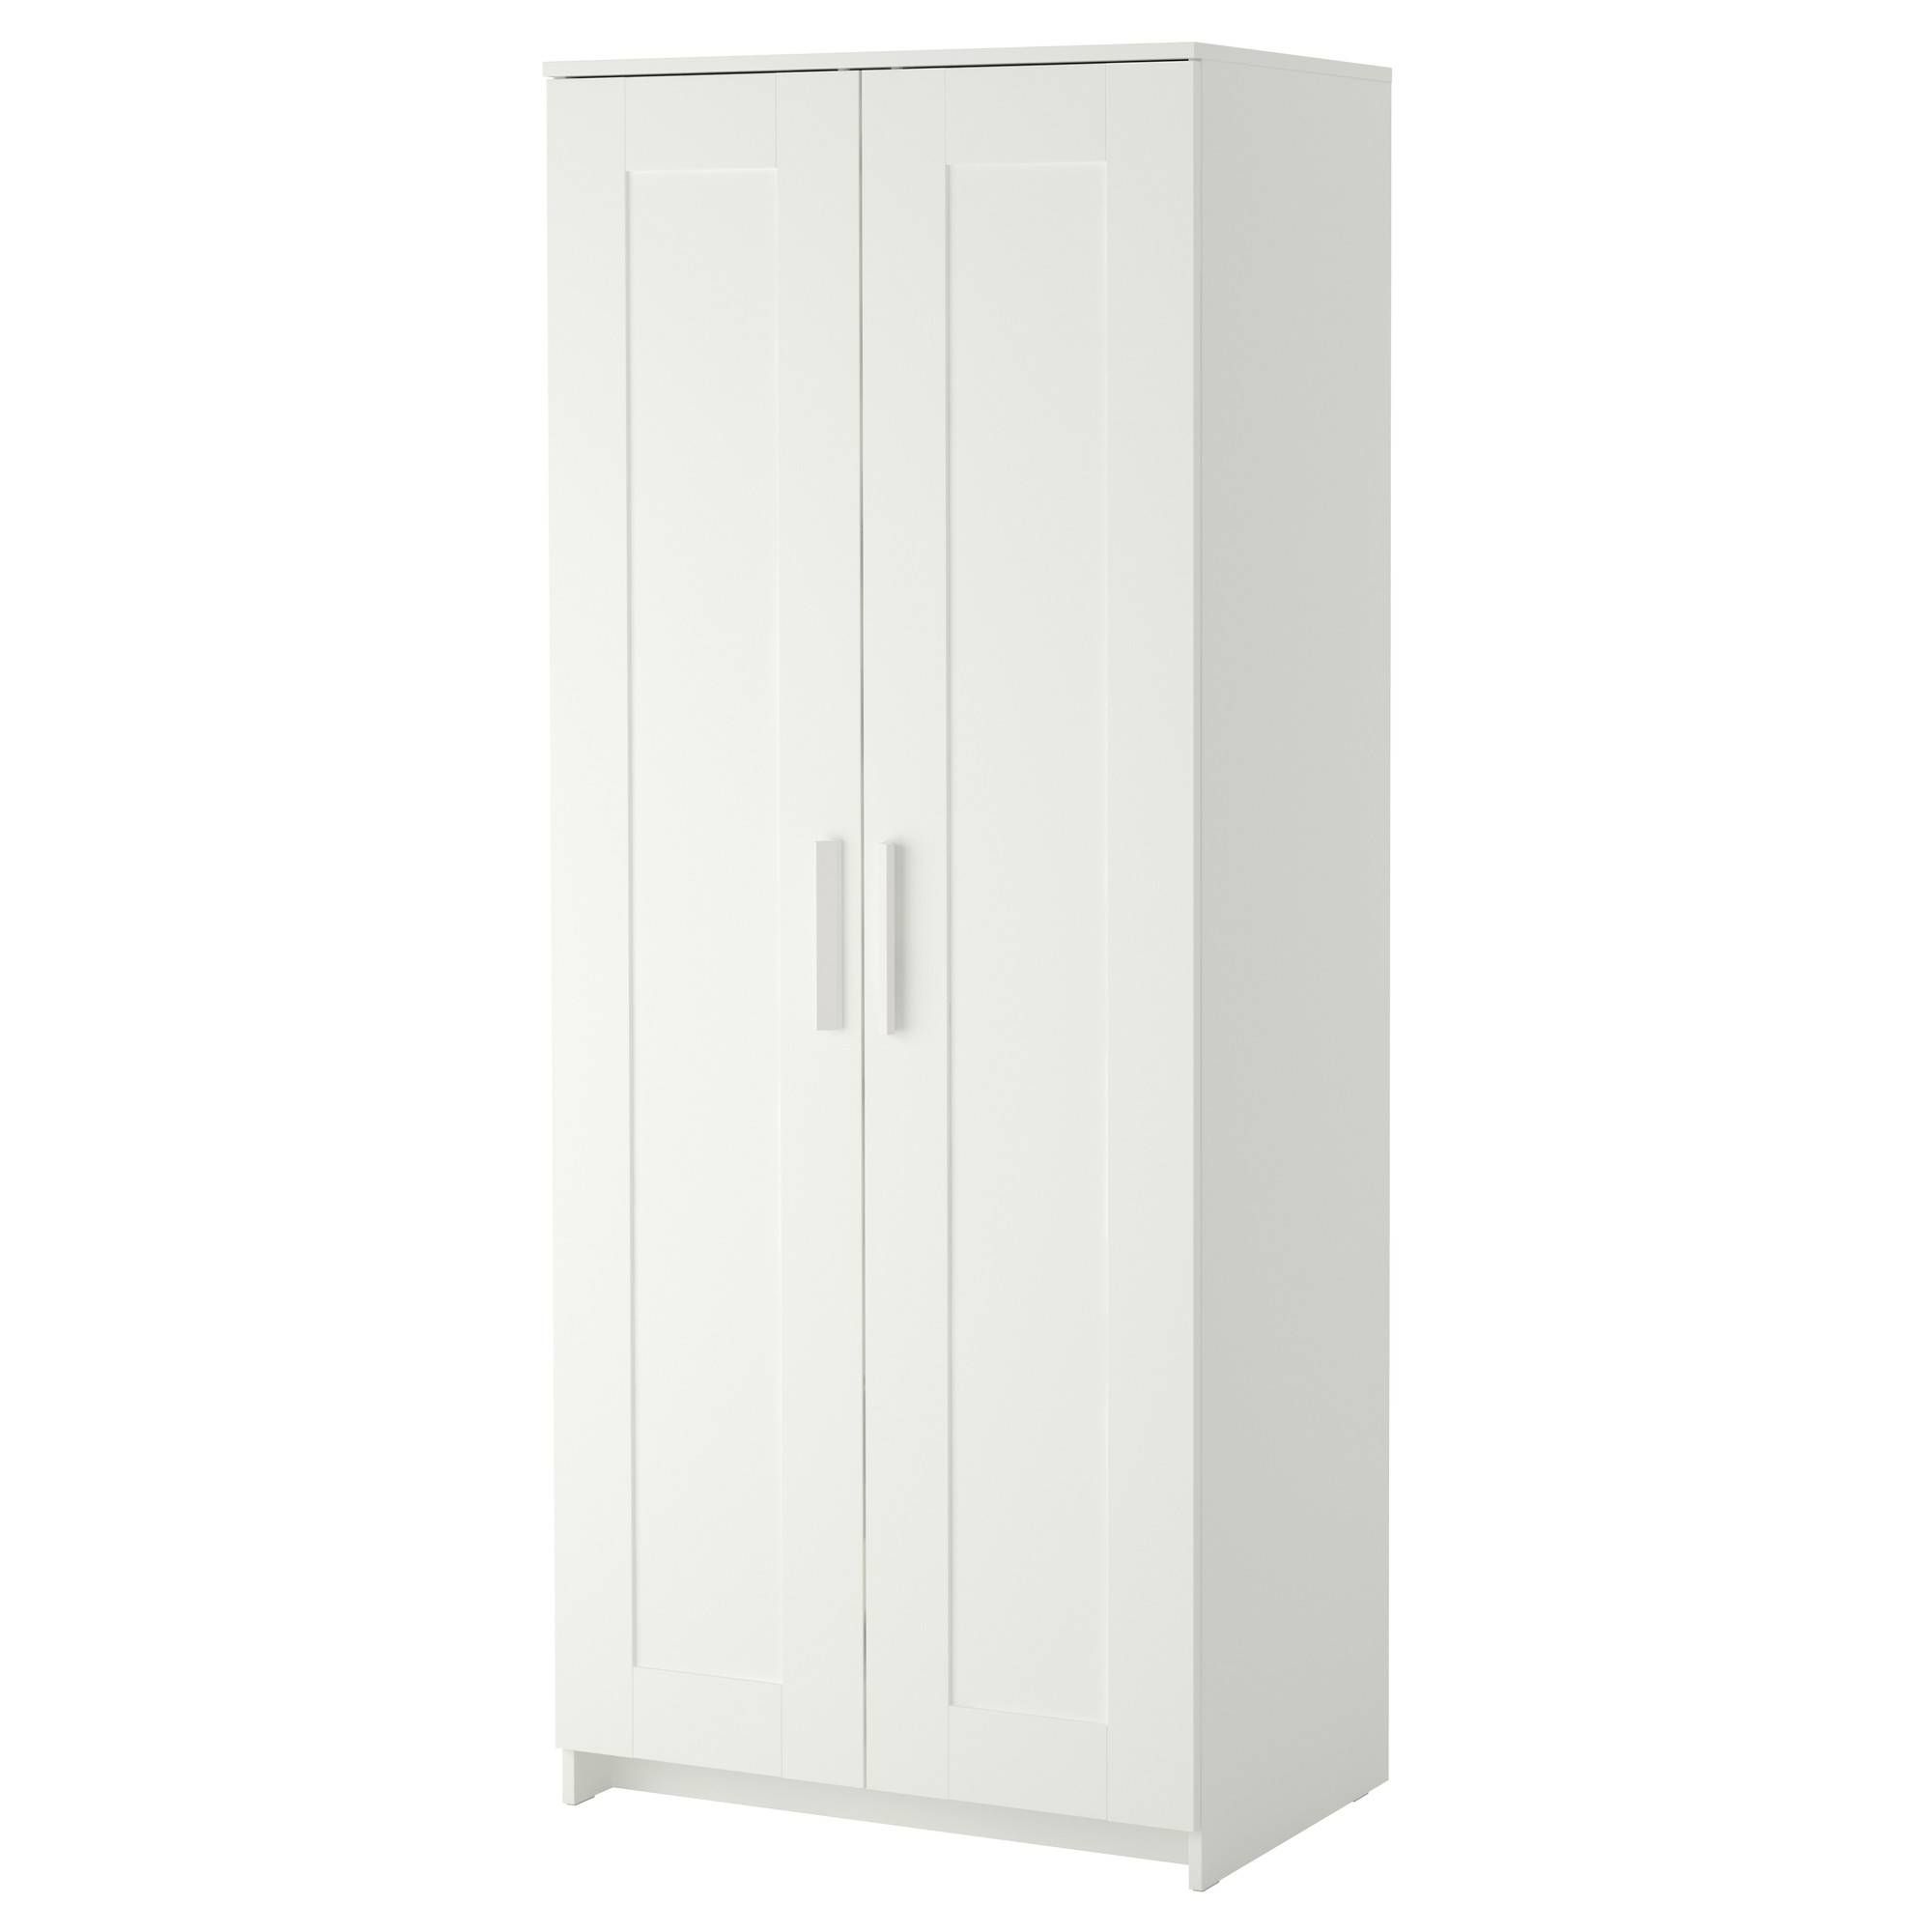 Free Standing Wardrobes | Ikea Within Double Rail Wardrobes Ikea (View 14 of 30)